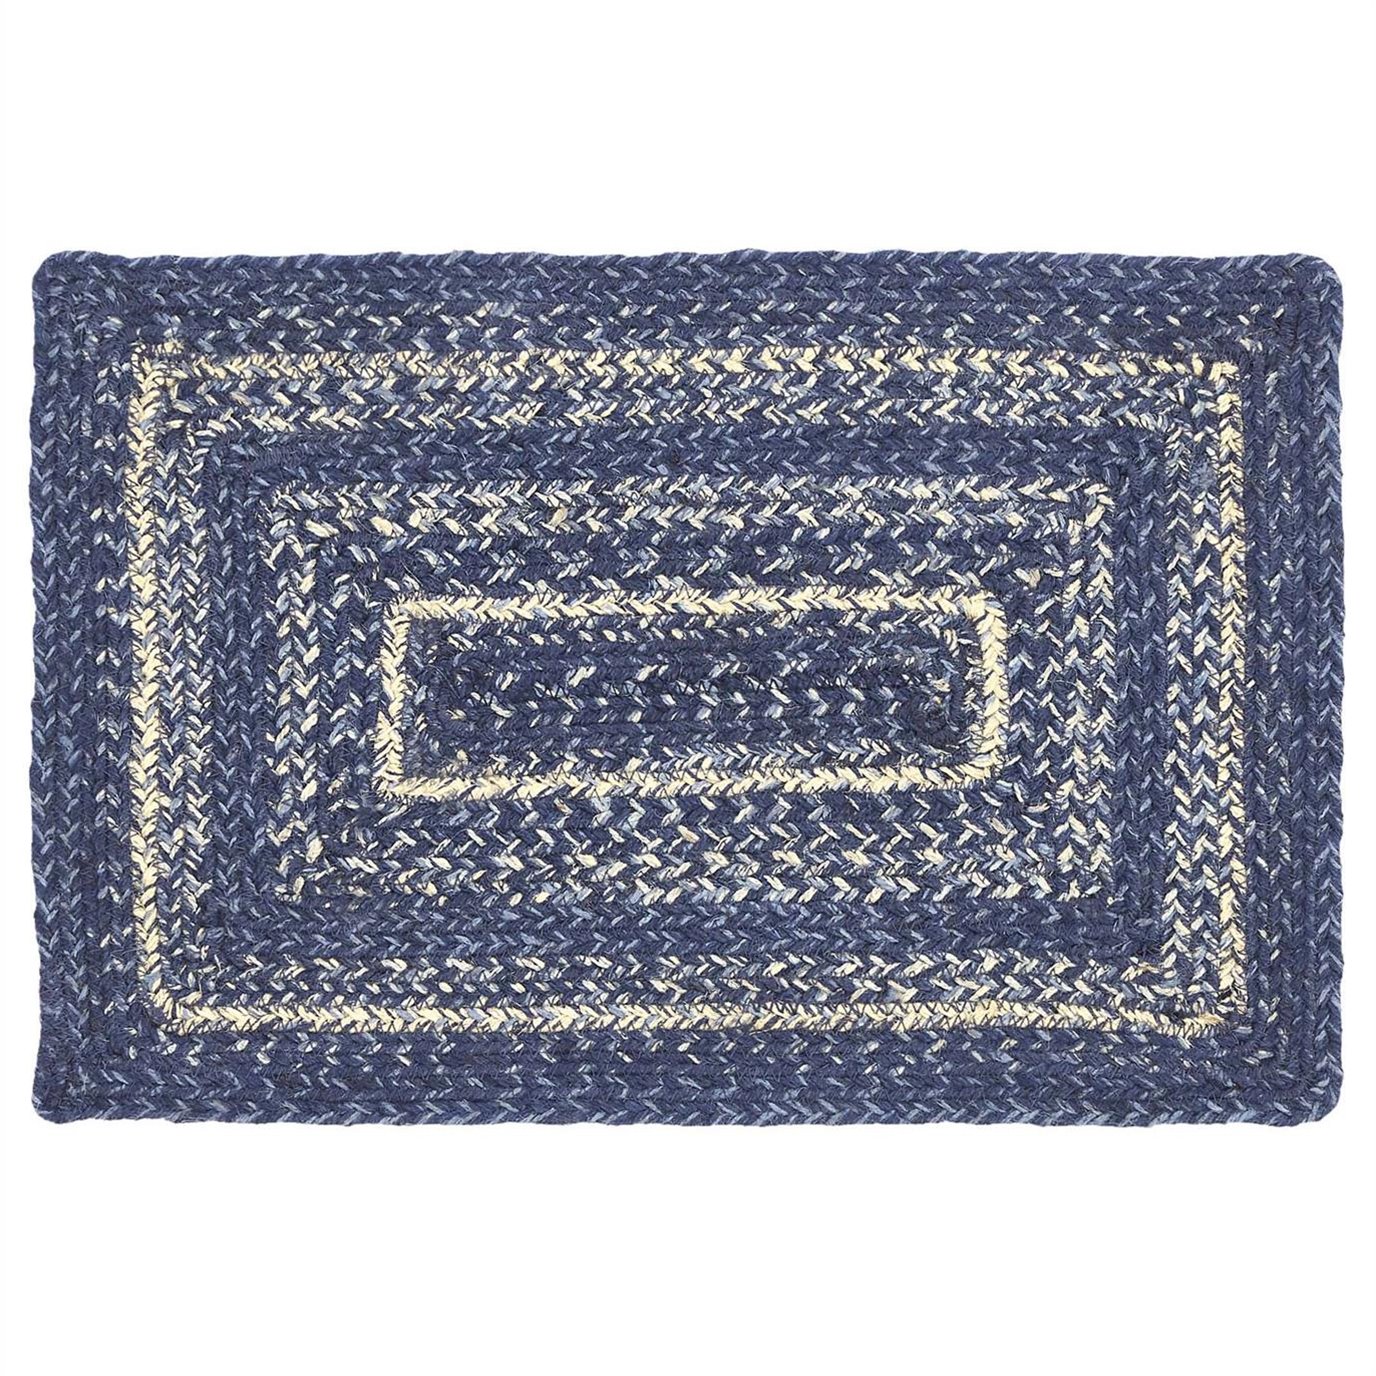 Great Falls Blue Jute Rect Placemat 10x15